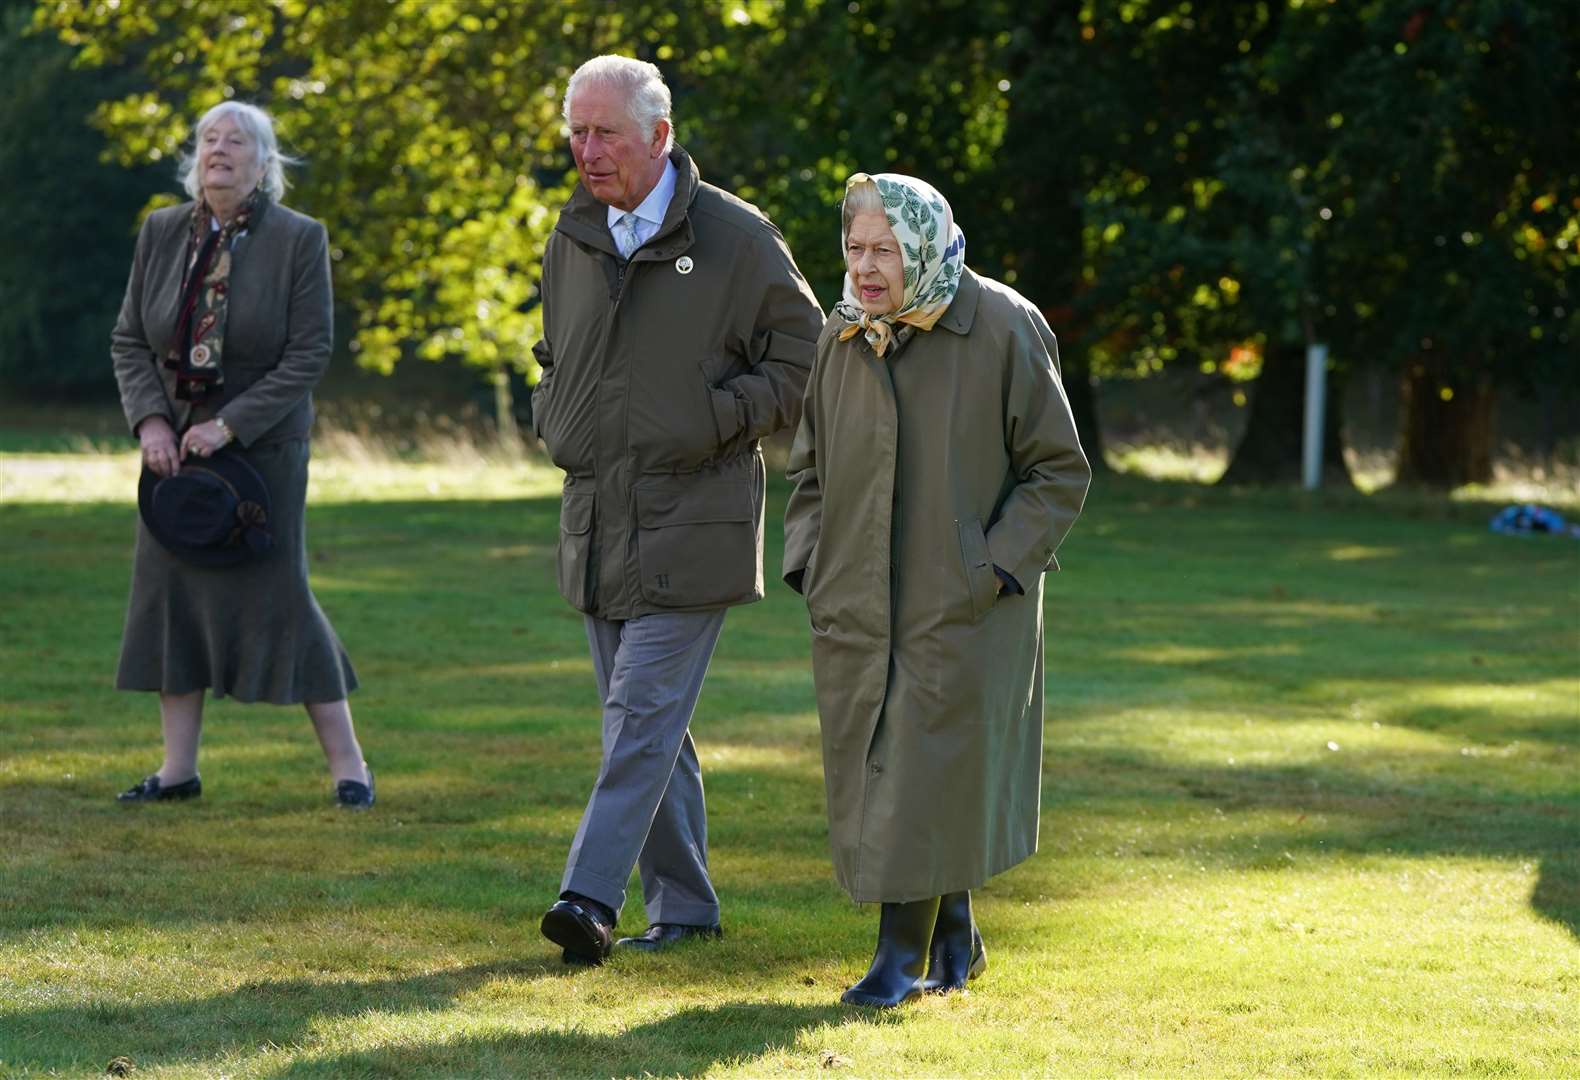 The Queen and the Prince of Wales at Balmoral Cricket Pavilion (Andrew Milligan/PA)